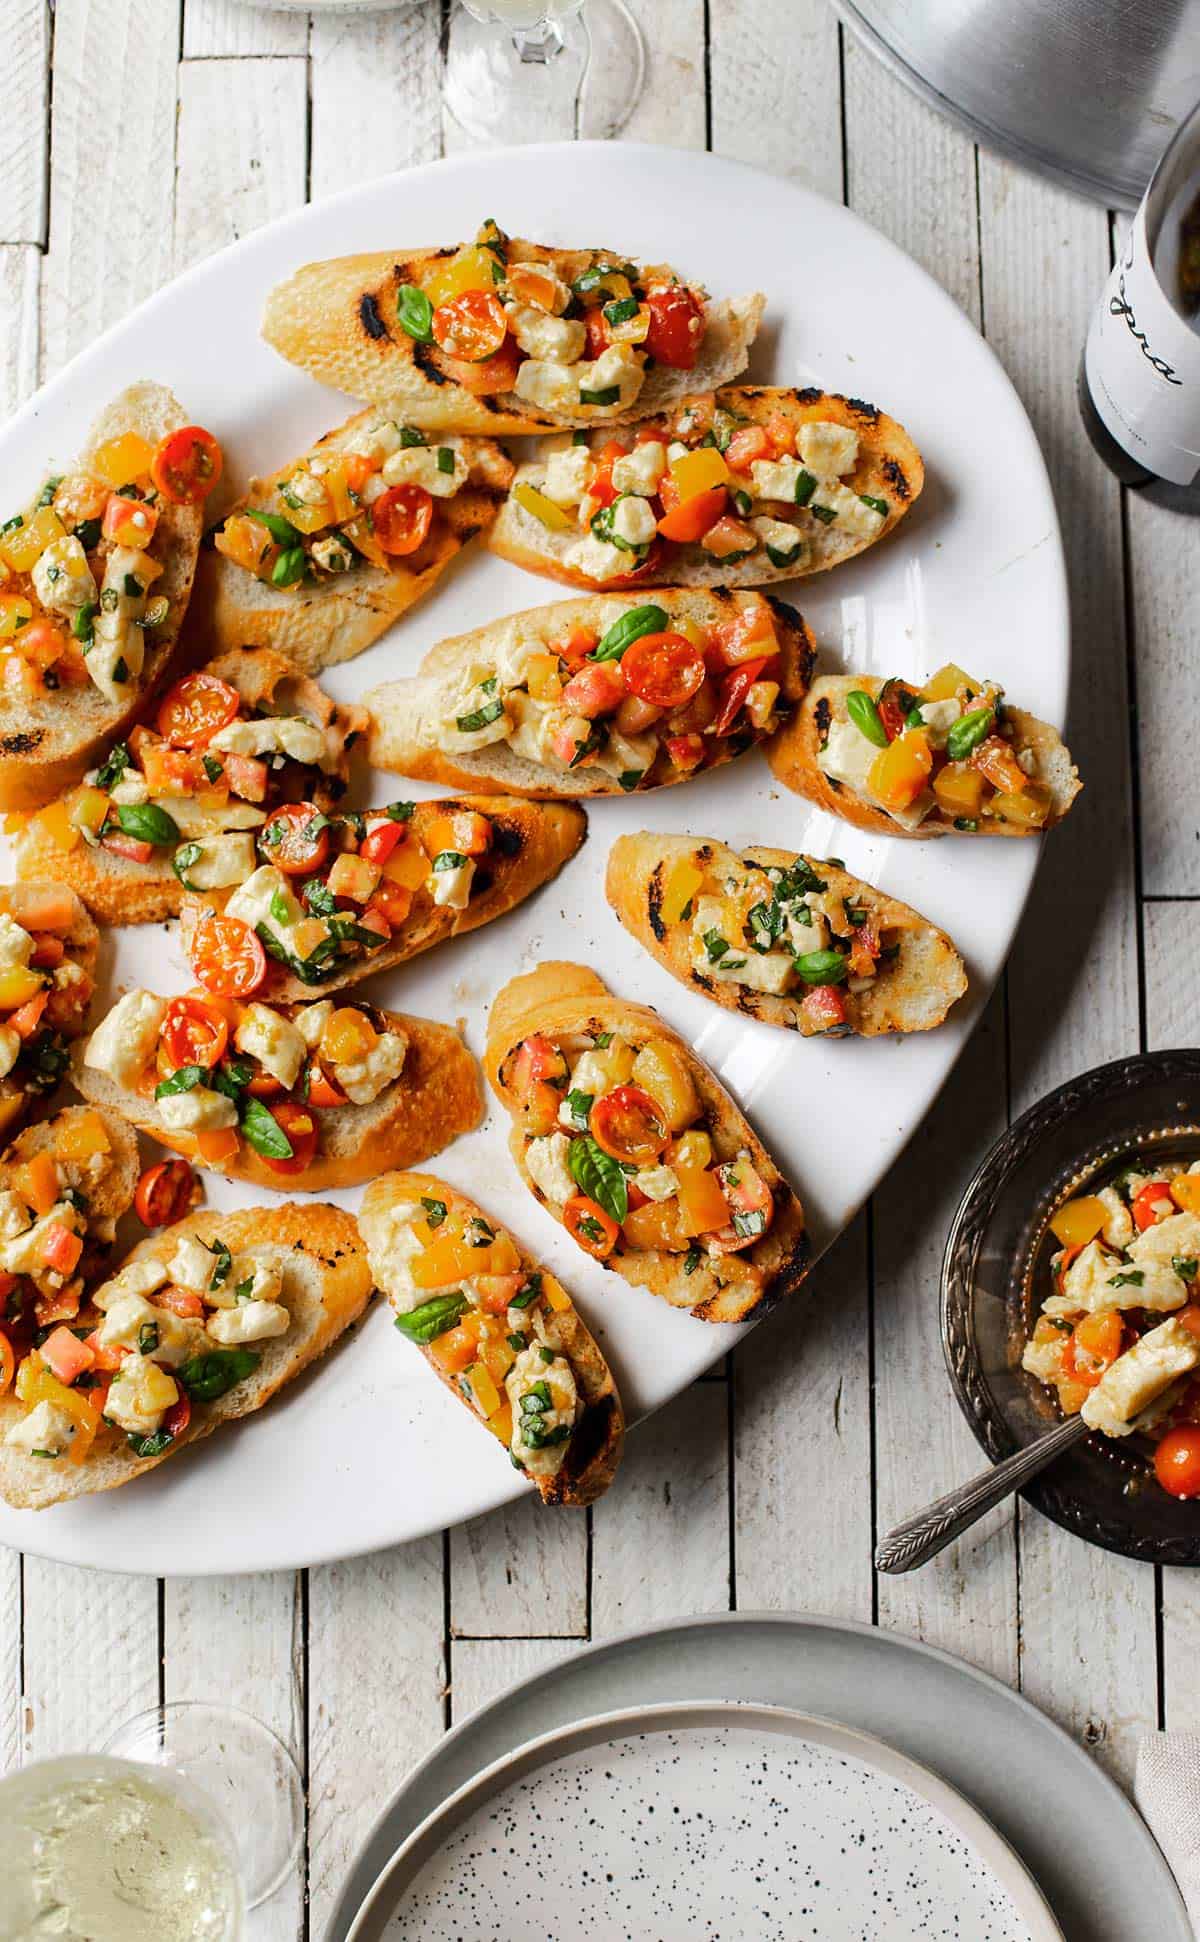 Tomato Bruschetta with Cheese is a delicious Italian antipasto recipe with cherry tomatoes, heirloom tomatoes, squeaky cheese, garlic and basil. bruschetta recipe | tomato bruschetta | easy bruschetta tomate 